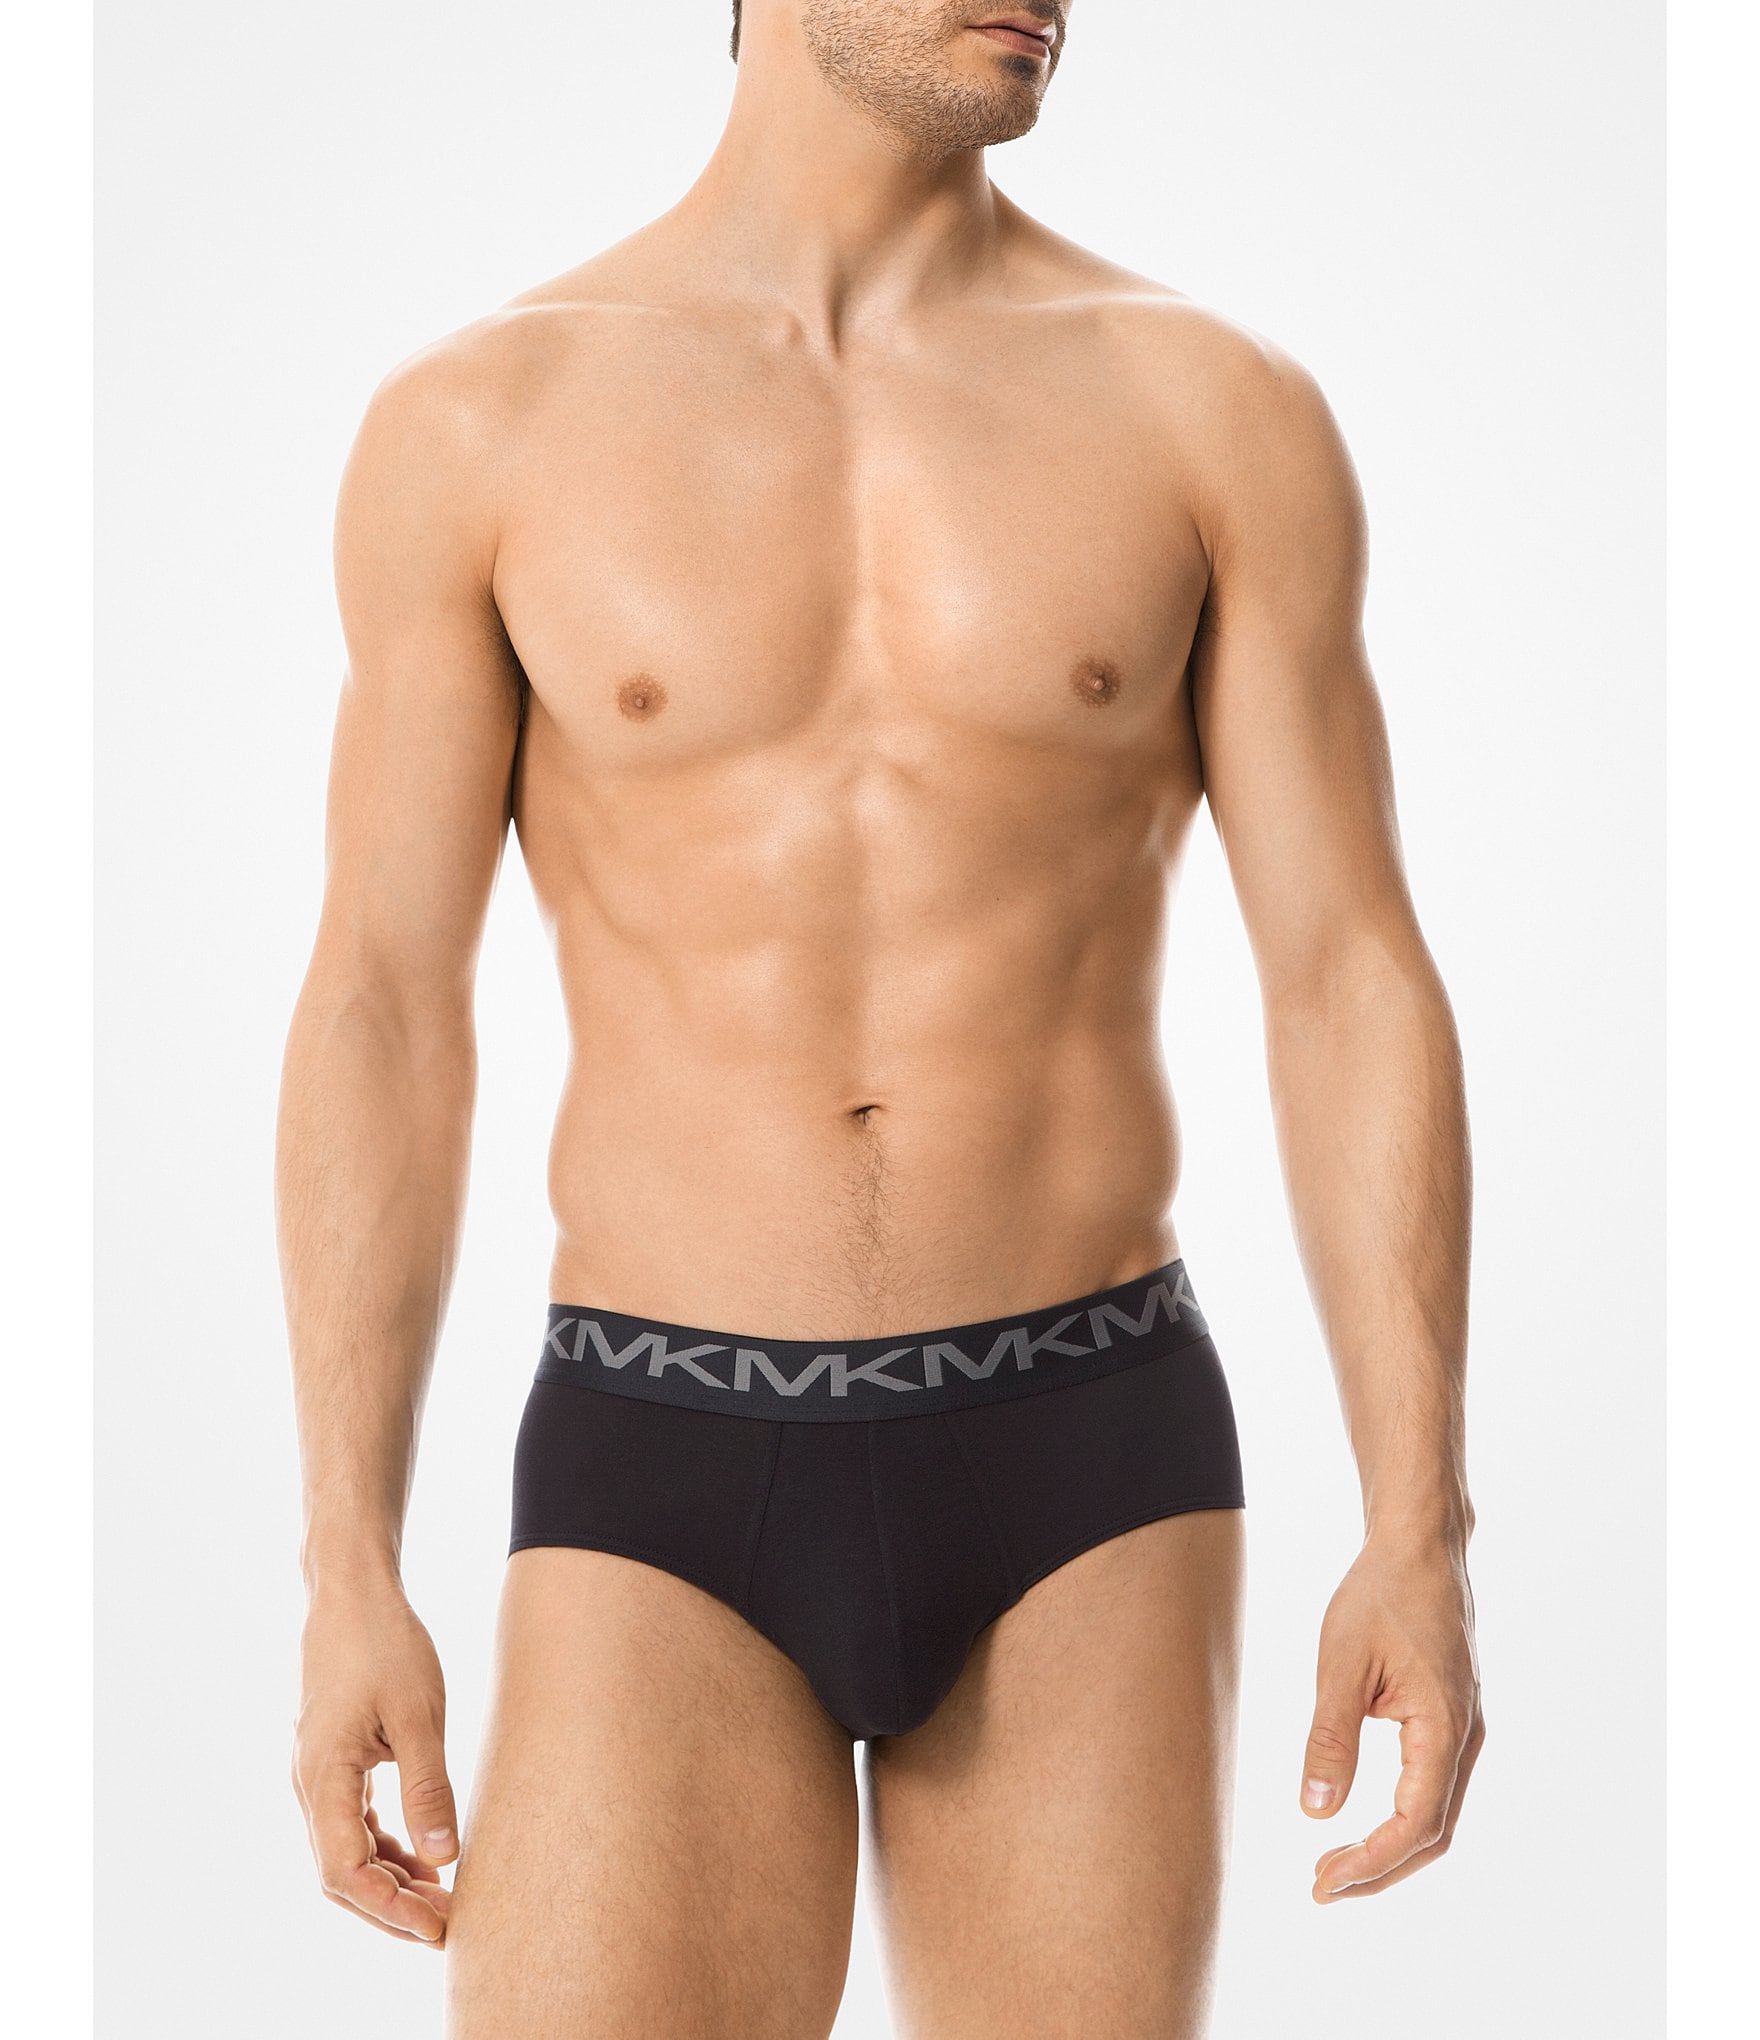 Michael Kors boxer brief with pouch